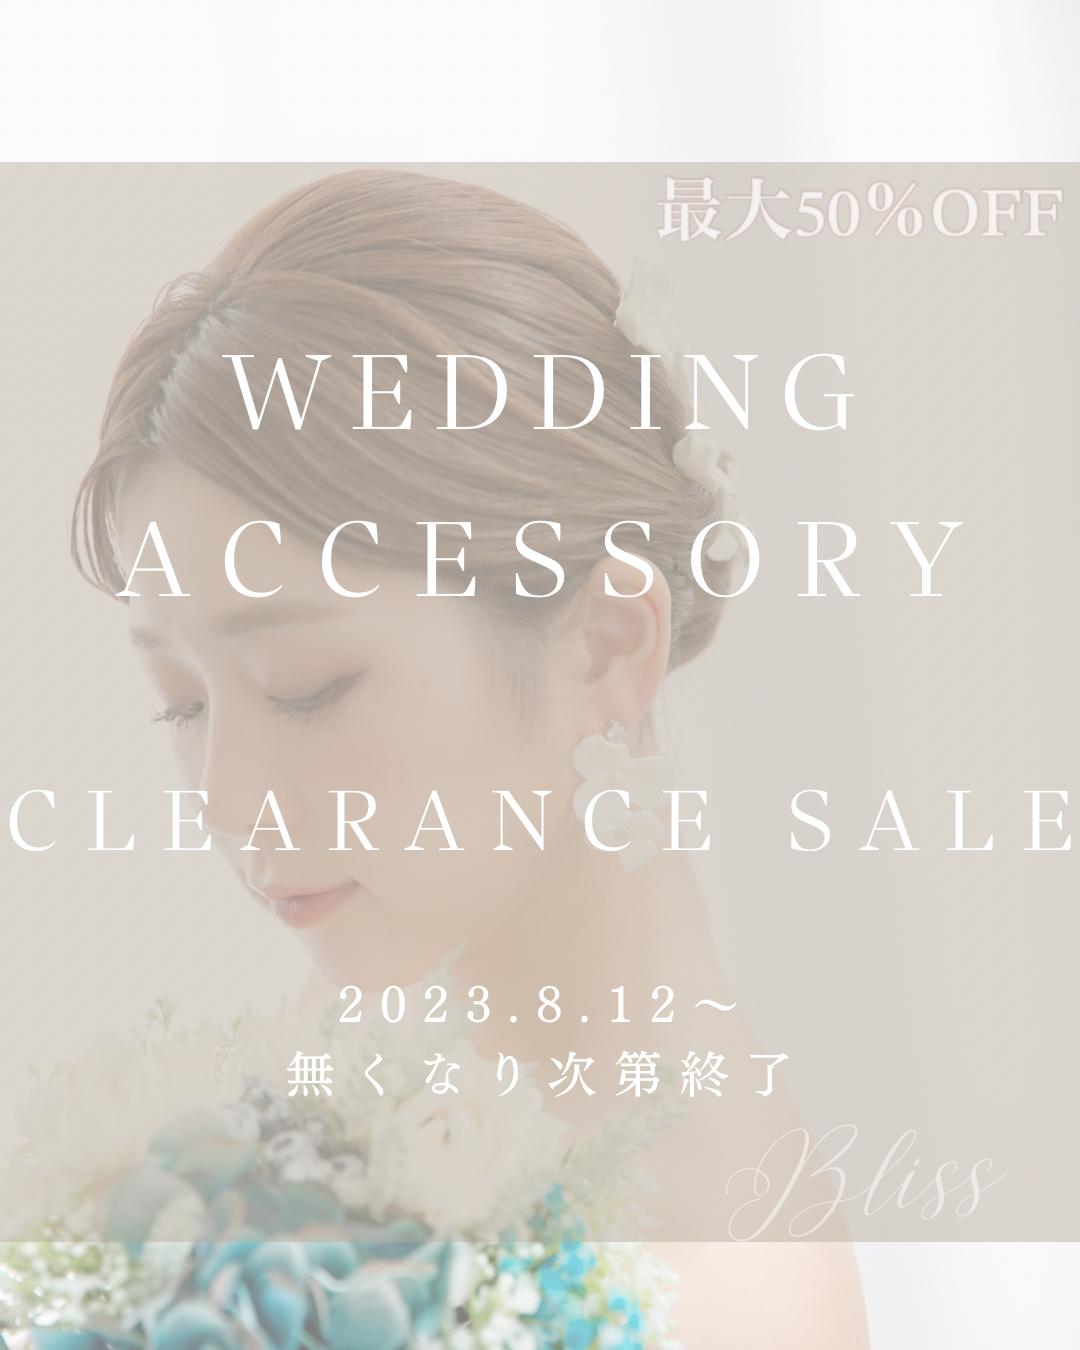 ◆ Clearance Sale のご案内 ◆